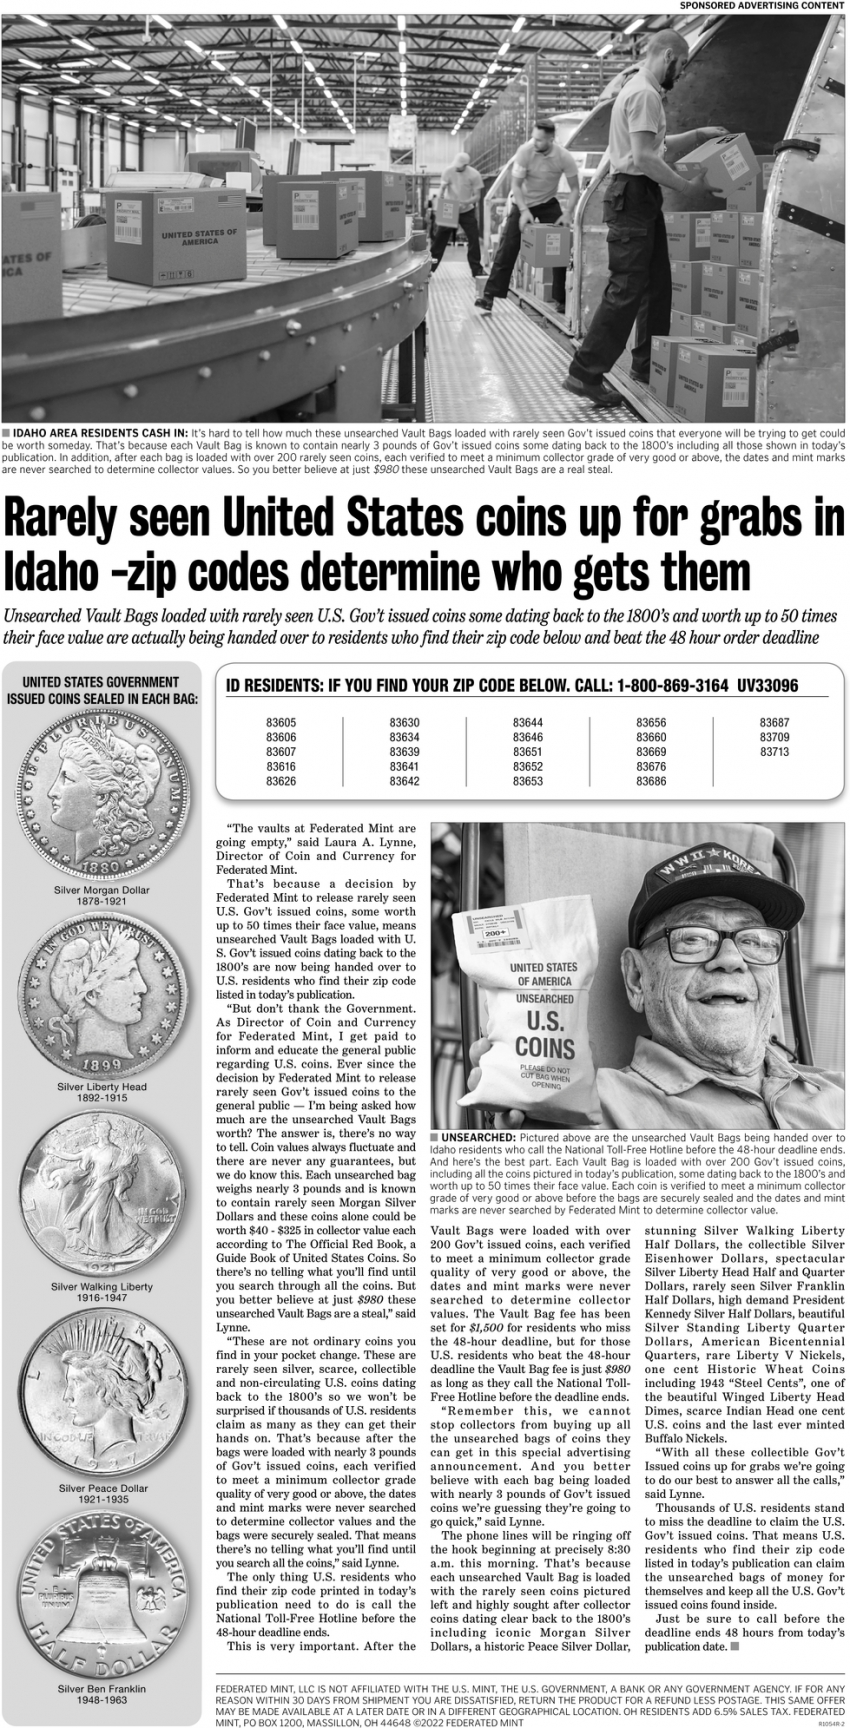 Rarely Seen United States Coins Up for Grabs in Idaho -Zip Codes Determine Who Gets Them